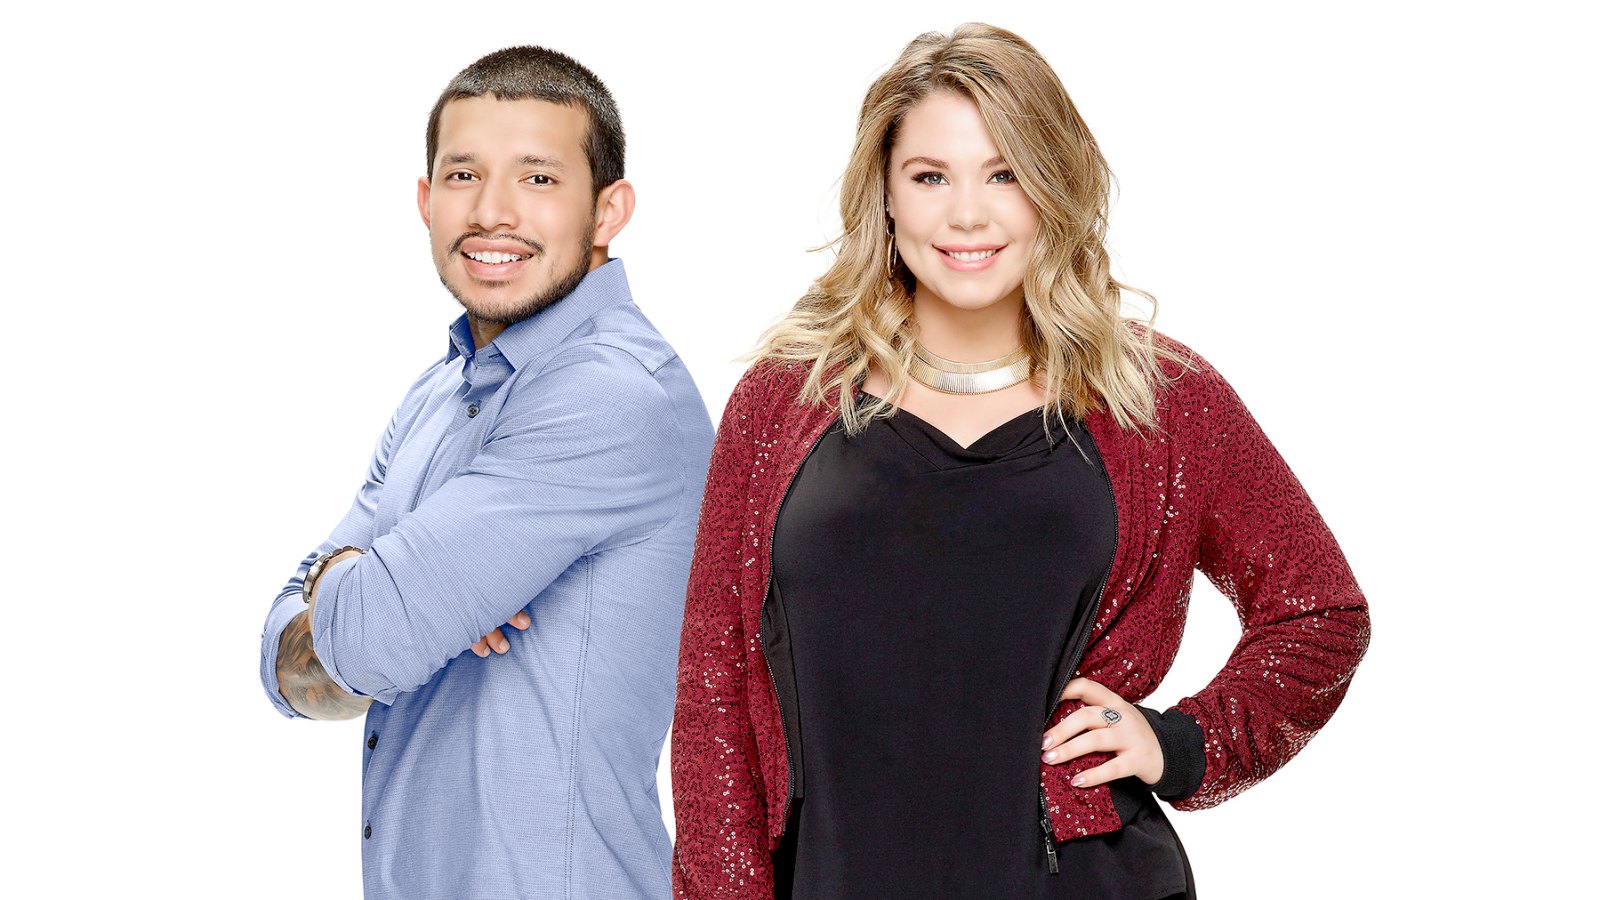 Javi Marroquin and Kailyn Lowry